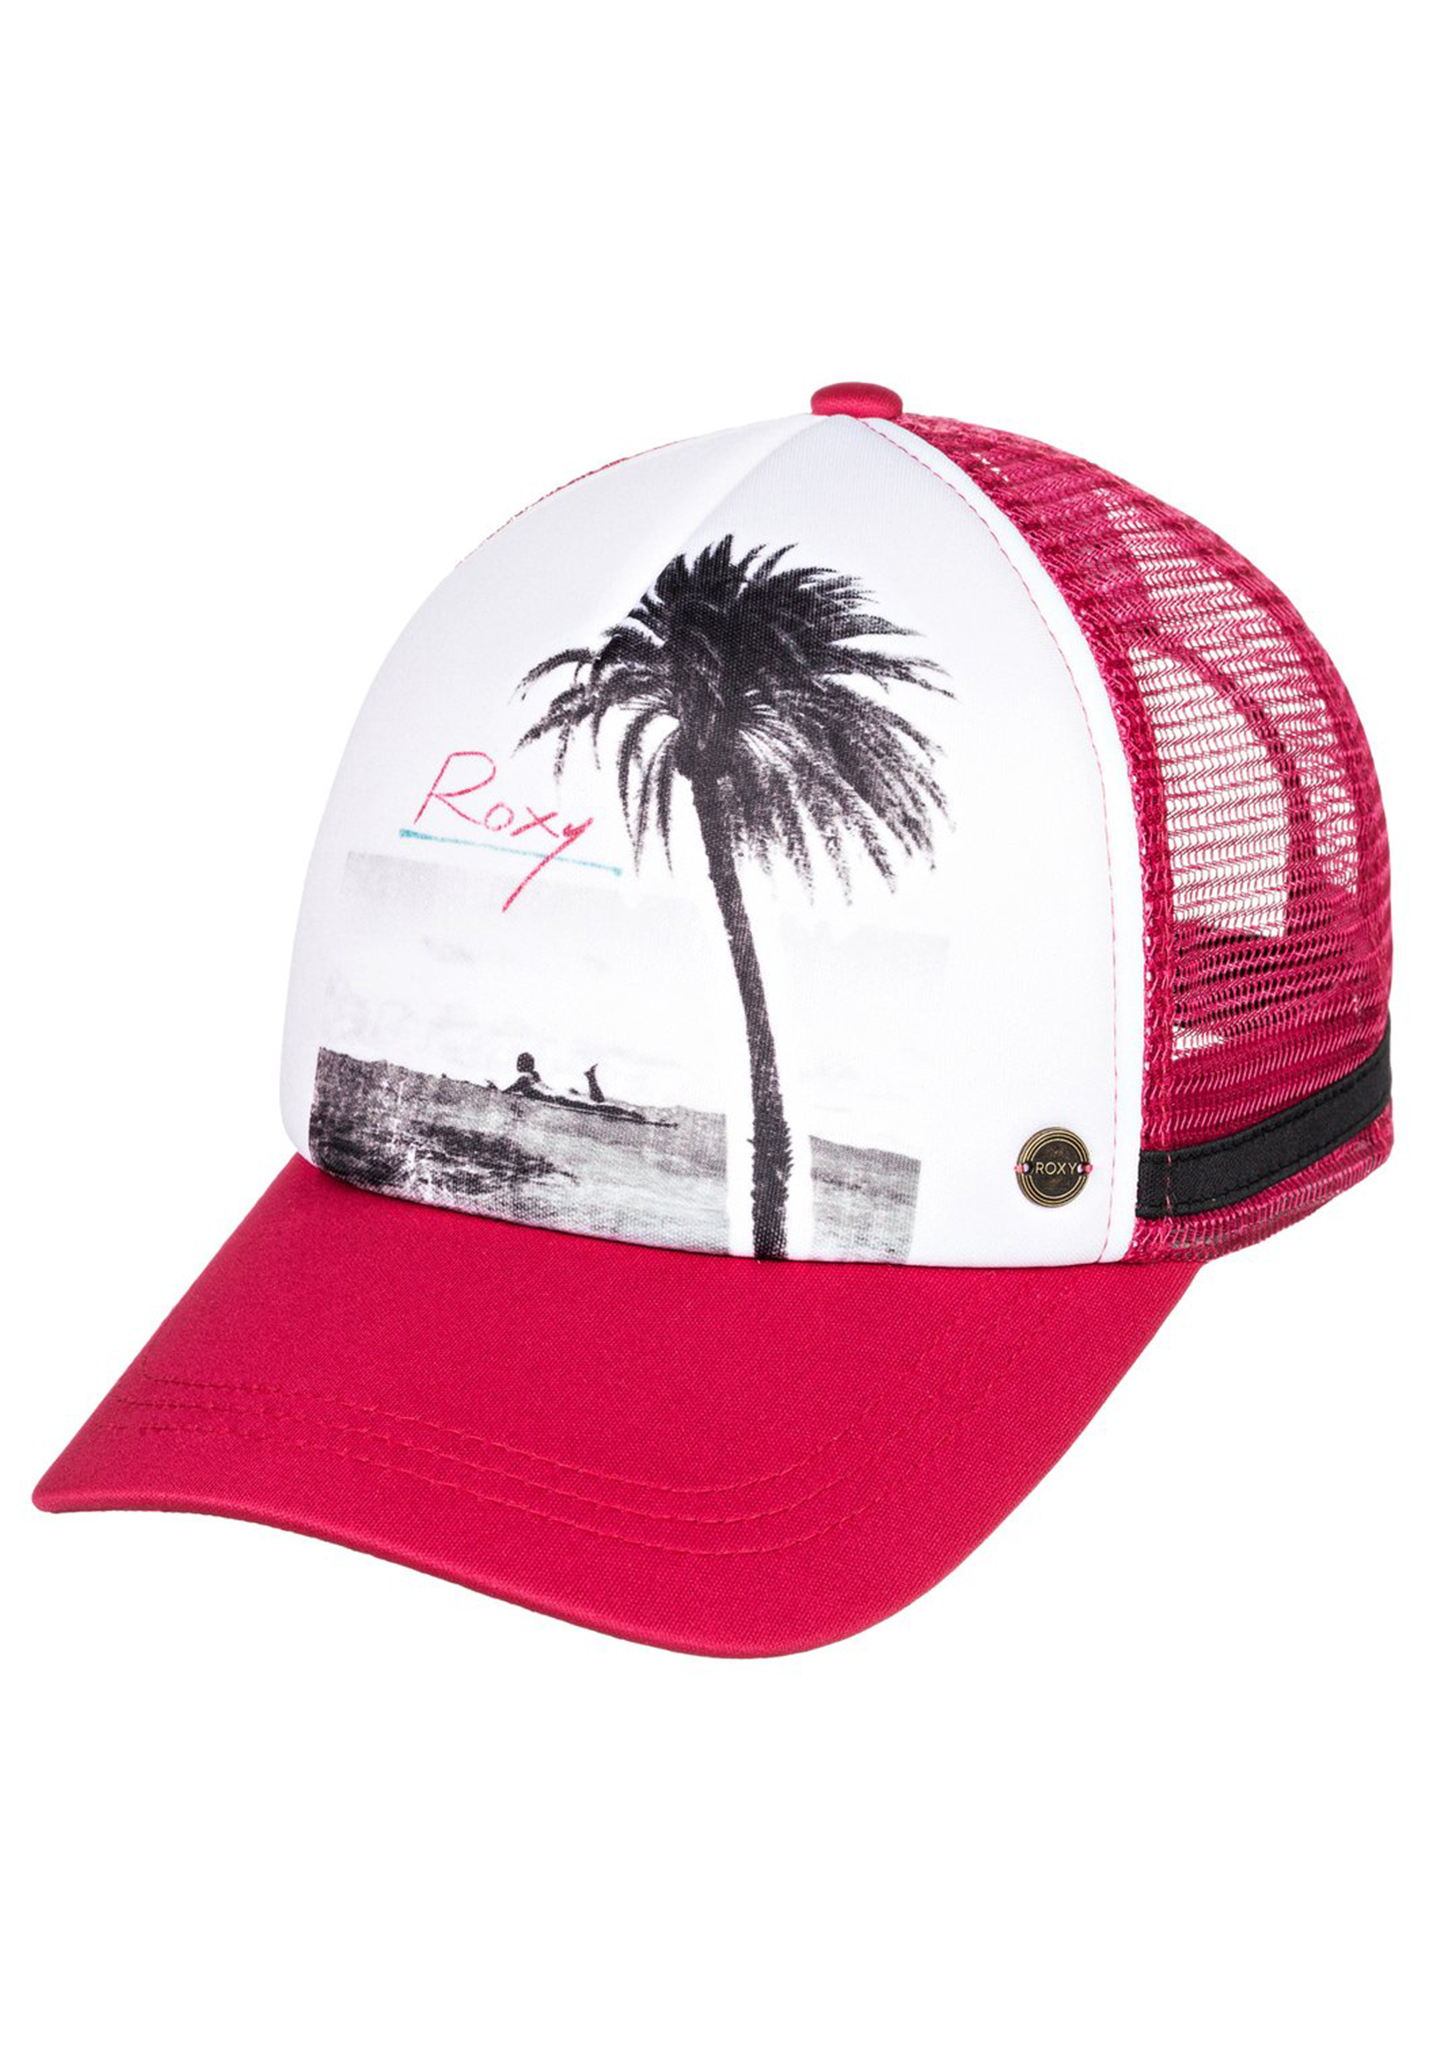 Roxy Dig This Strapback Cap cerise One Size